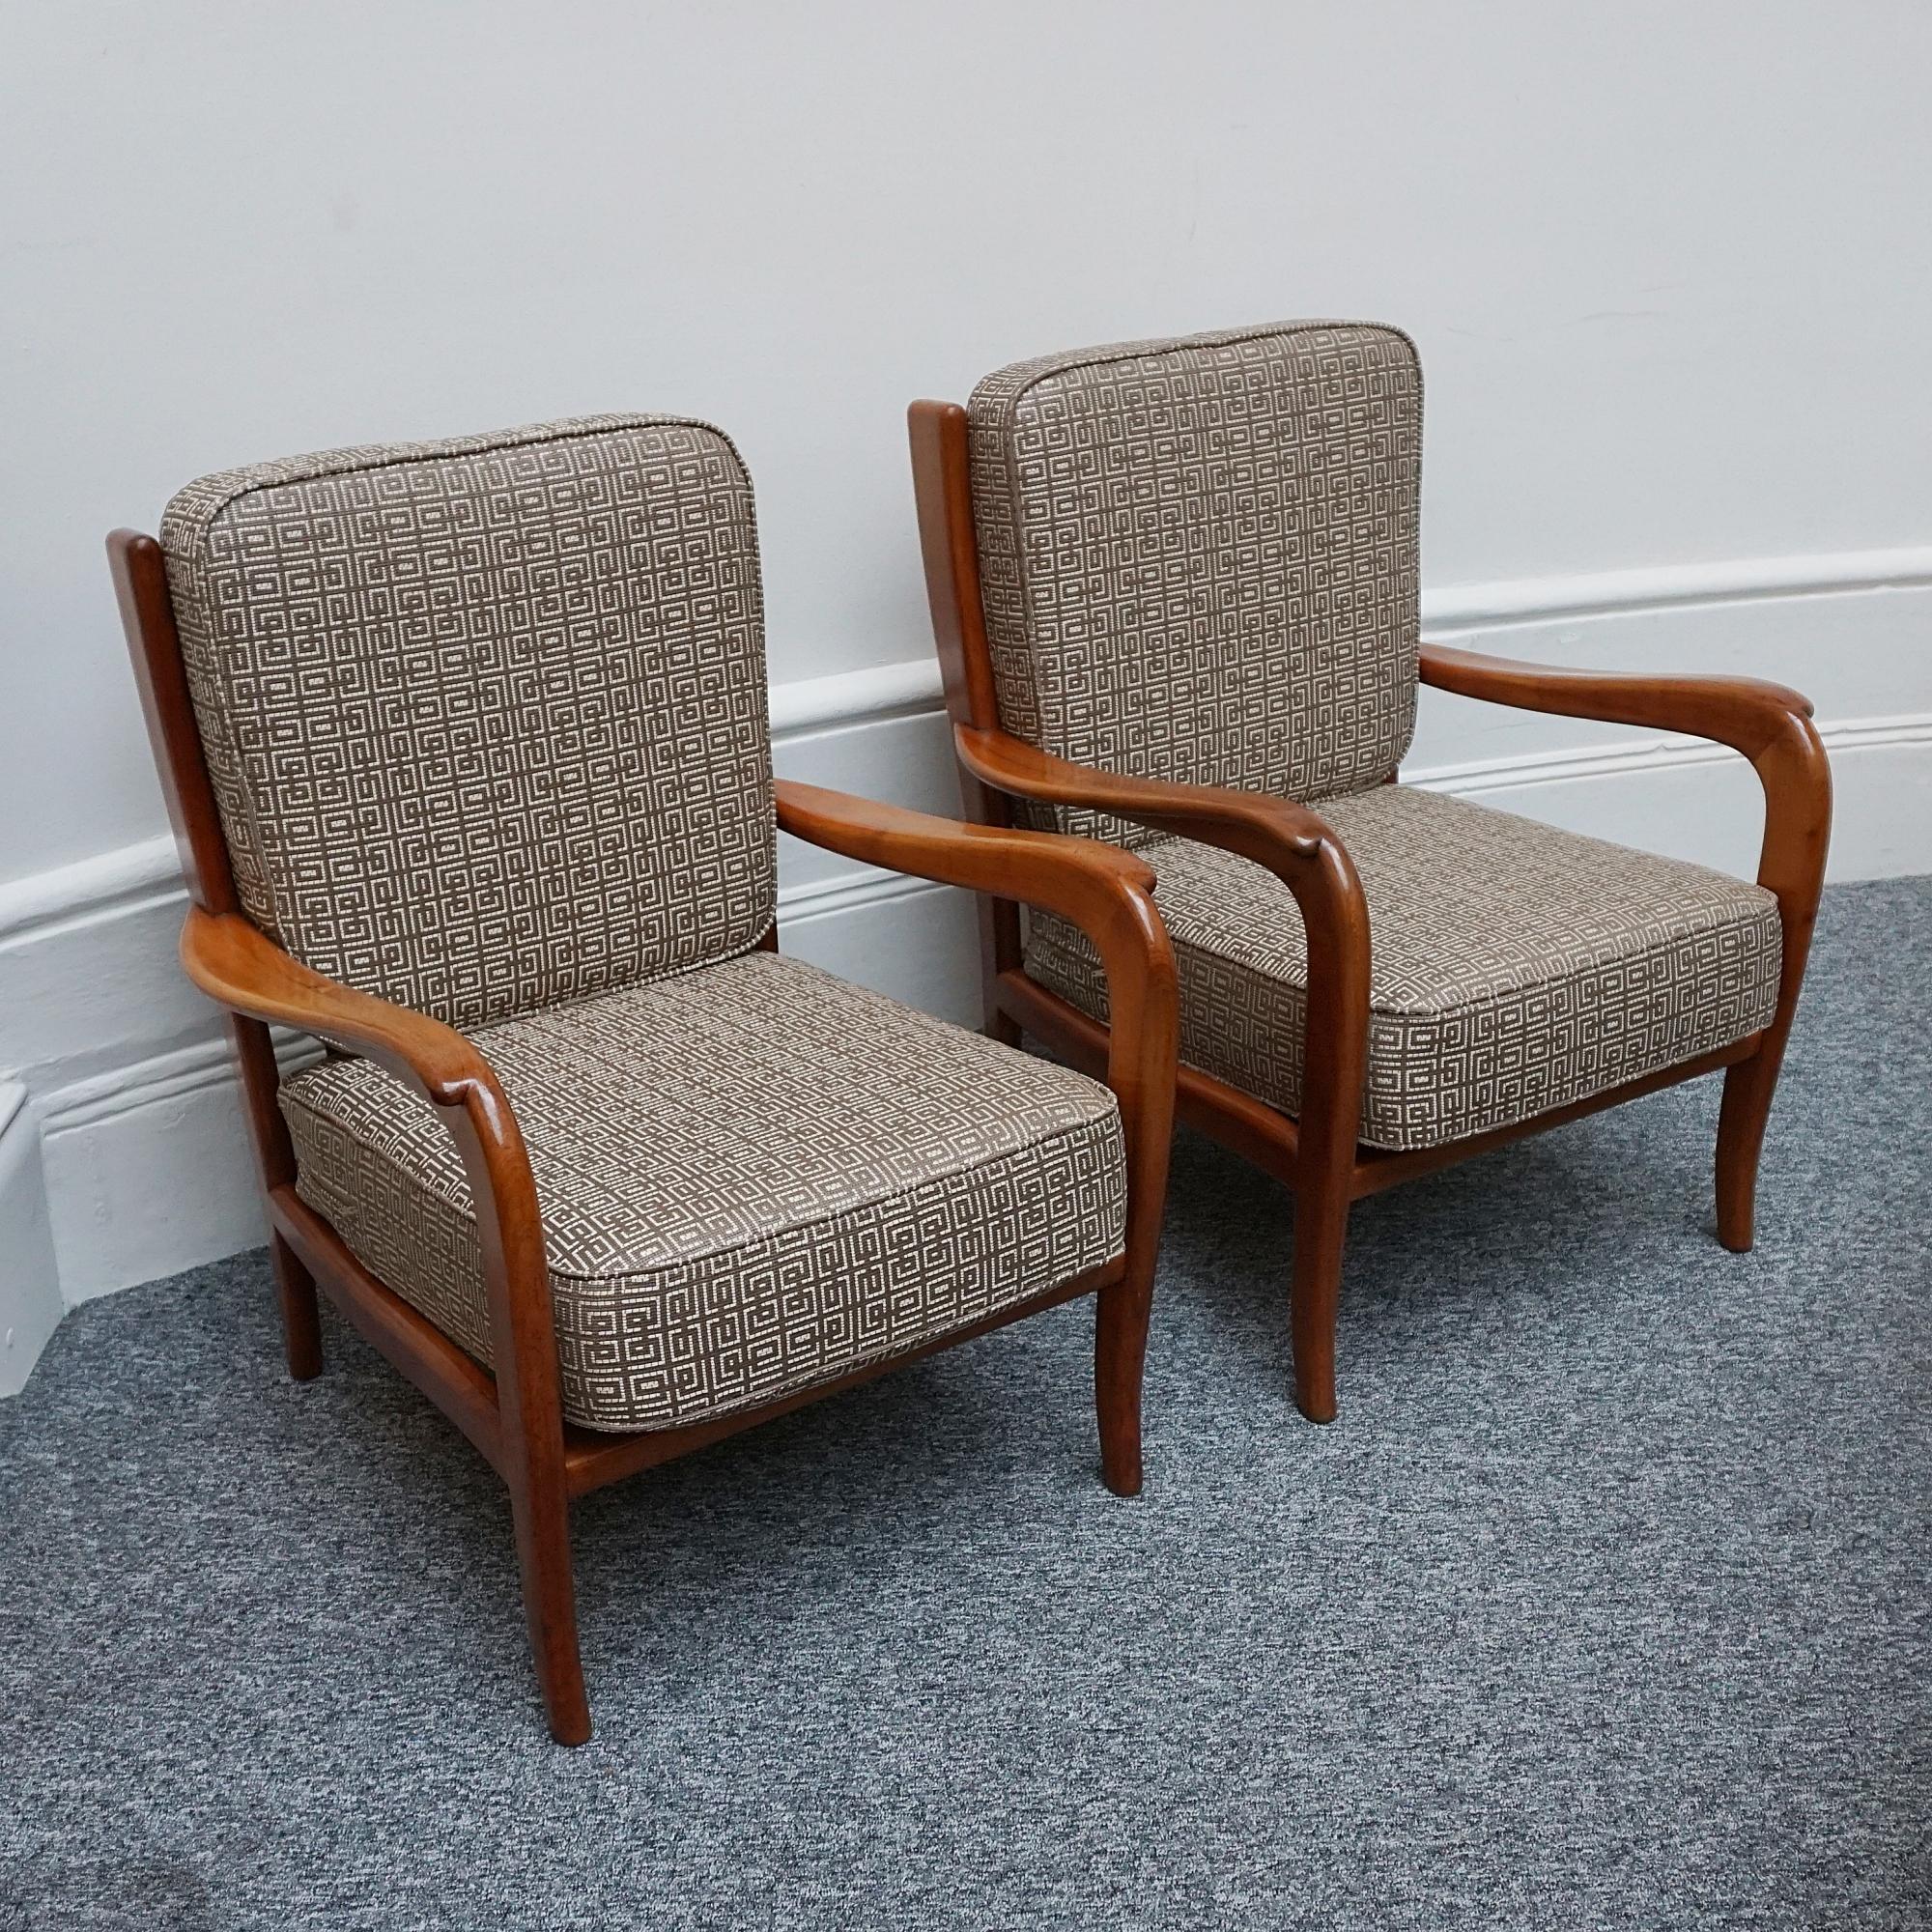 A pair of Mid-Century armchairs by Paolo Buffa. Cherry wood frame with a patterned fabric re-upholstery. 

Dimensions: H 80cm W 62cm D 62cm Sest H 42cm W 50cm D 50cm

Origin: Italian

Date: Circa 1950

Item Number: 2302243

All of our furniture is